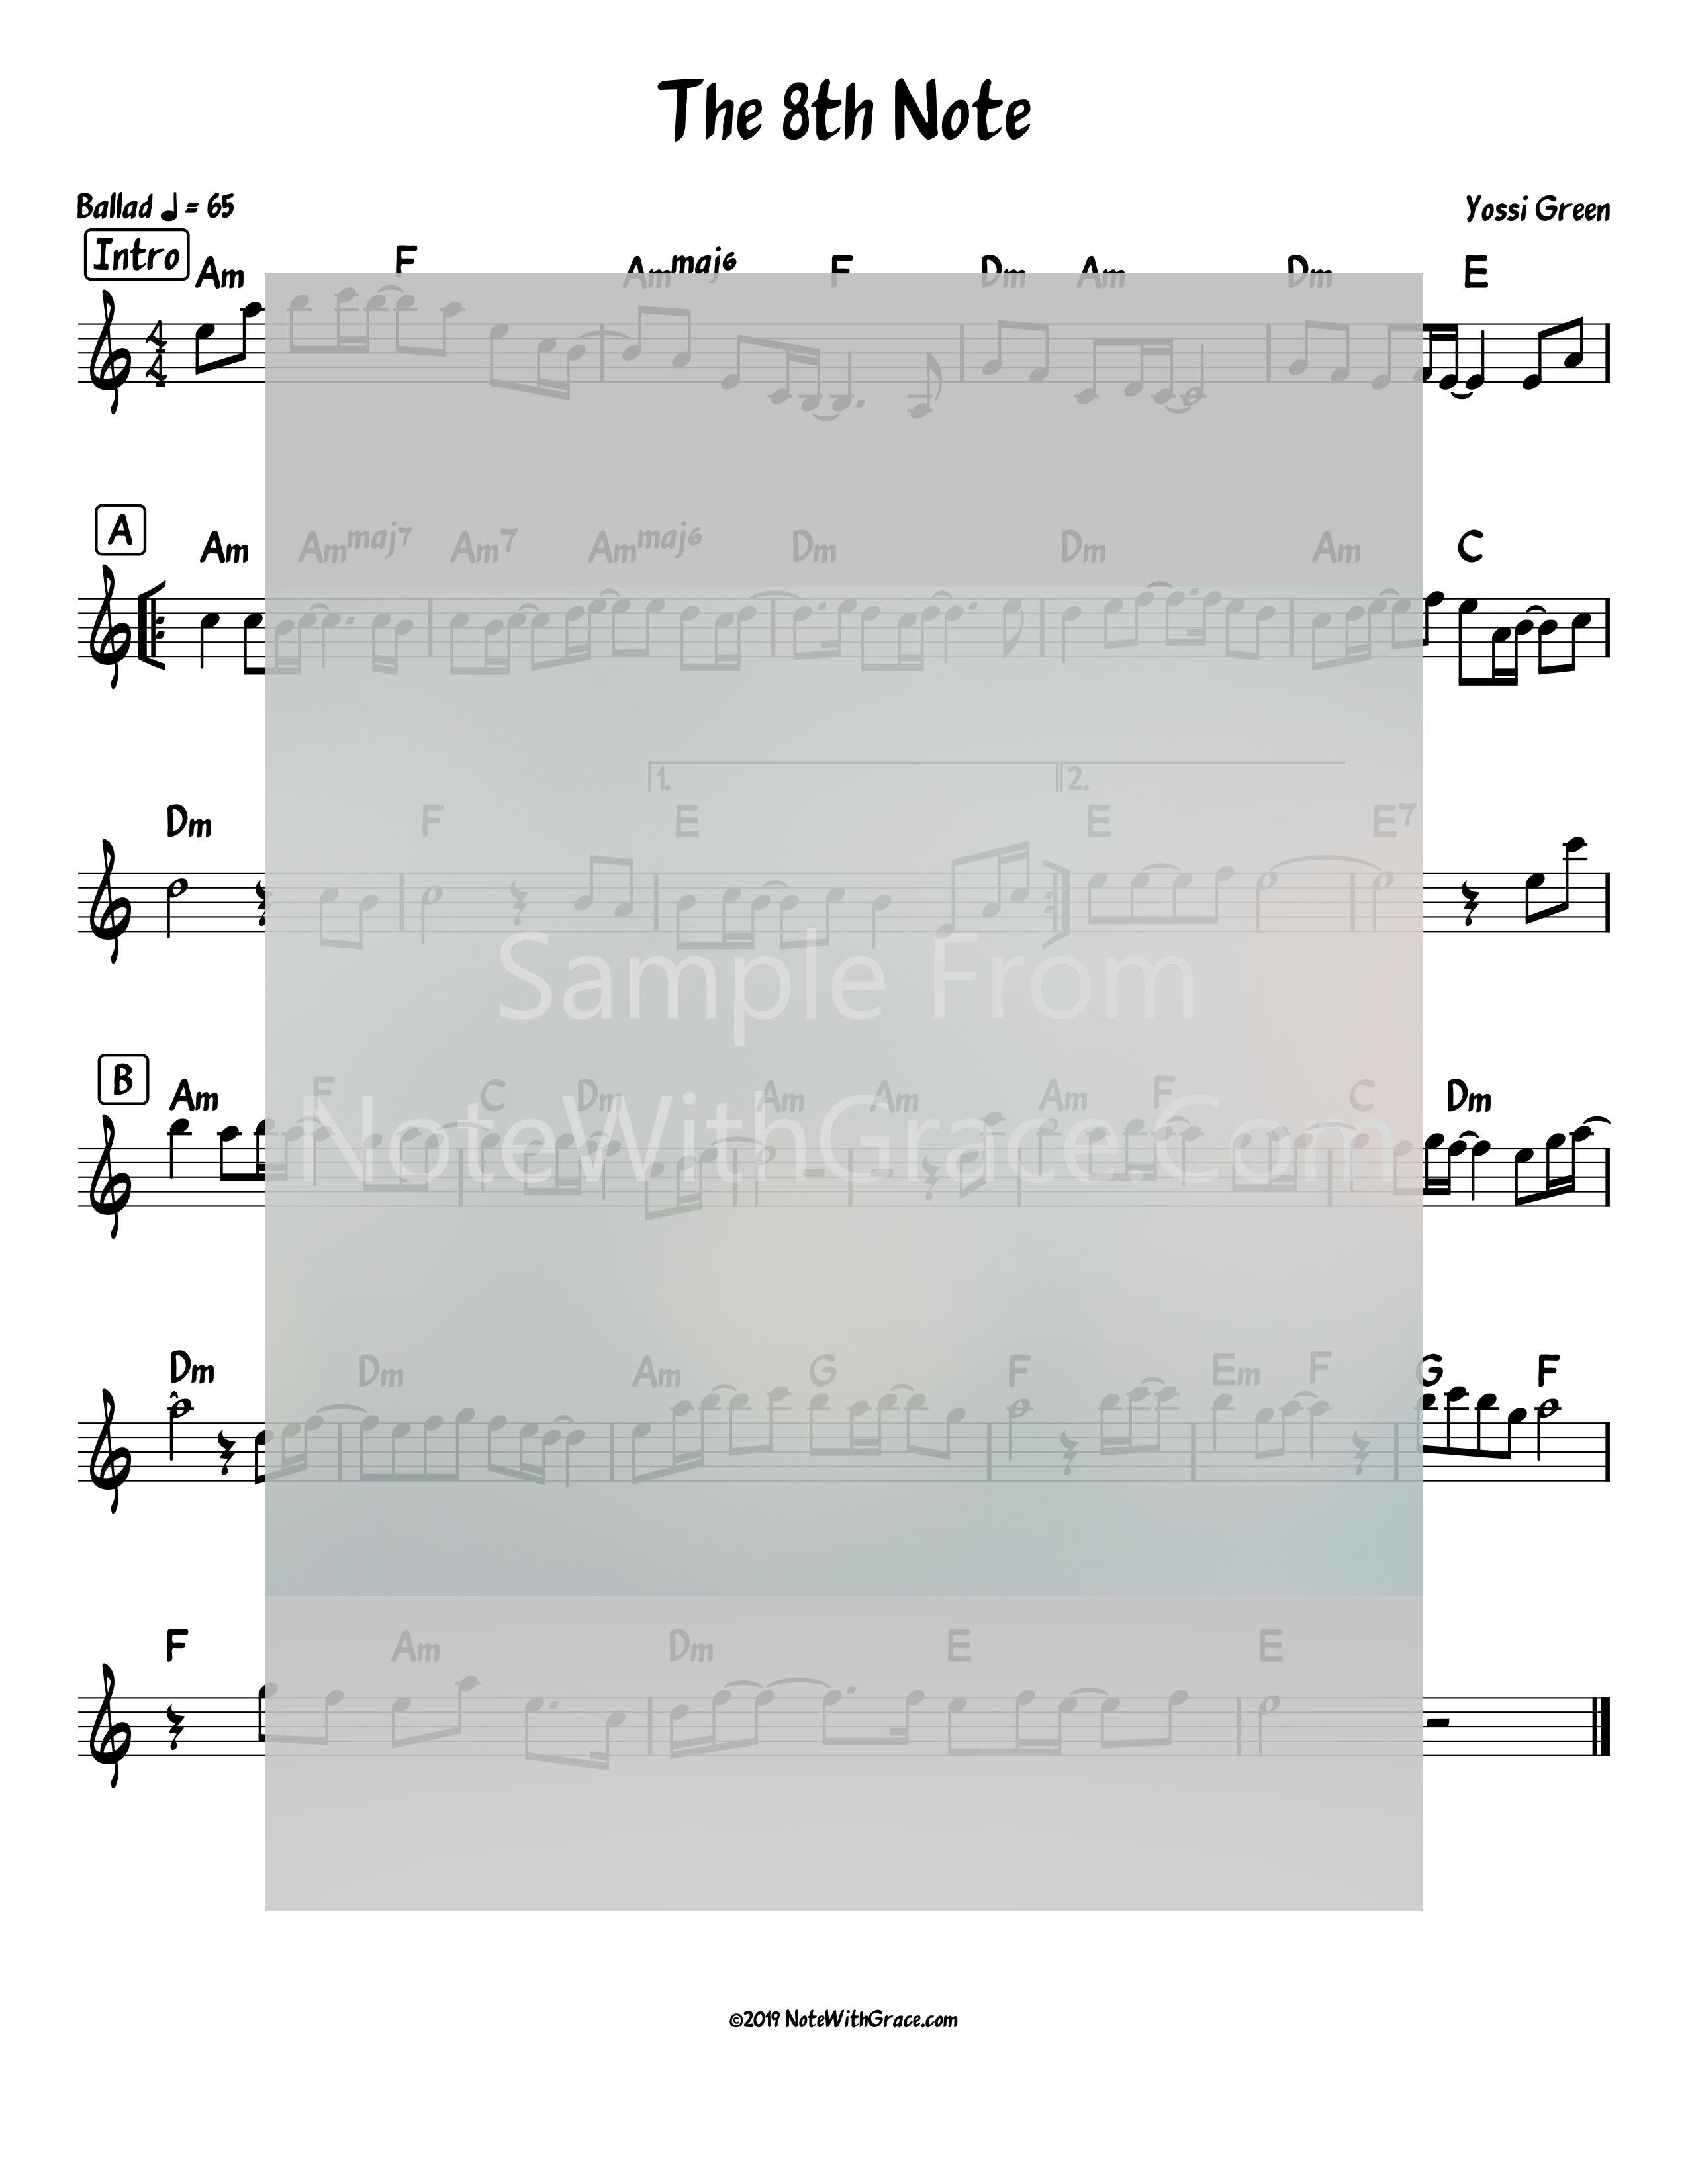 The 8th Note Lead Sheet (Yossi Green) Album: The 8th Note (Released 2008)-Sheet music-NoteWithGrace.com